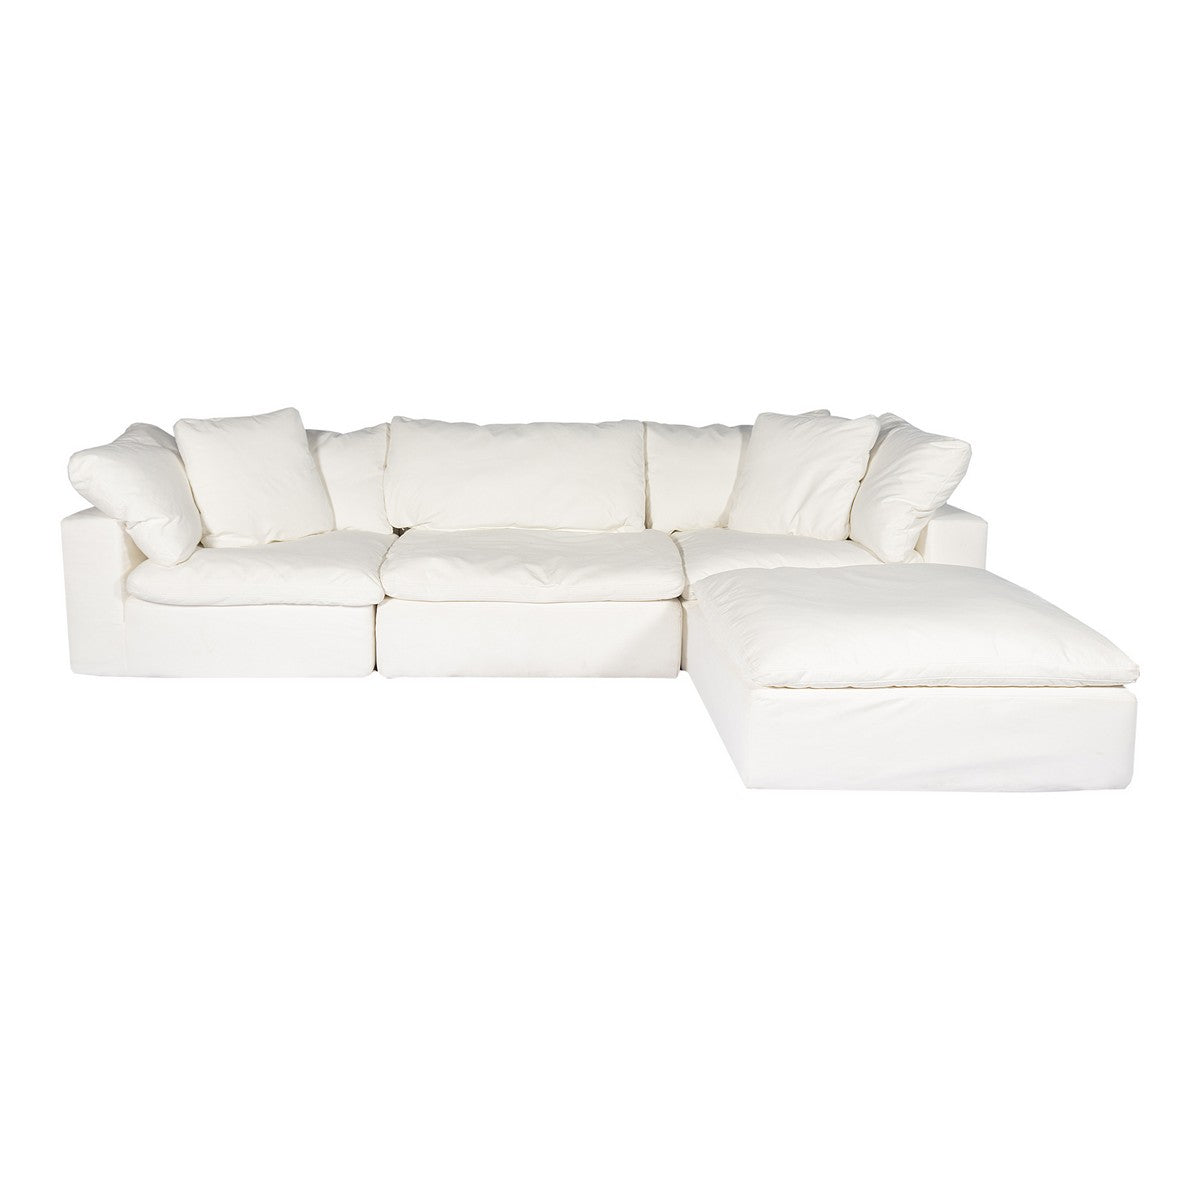 Moe's Home Collection Clay Lounge Modular Sectional Livesmart Fabric Cream - YJ-1008-05 - Moe's Home Collection - Extras - Minimal And Modern - 1